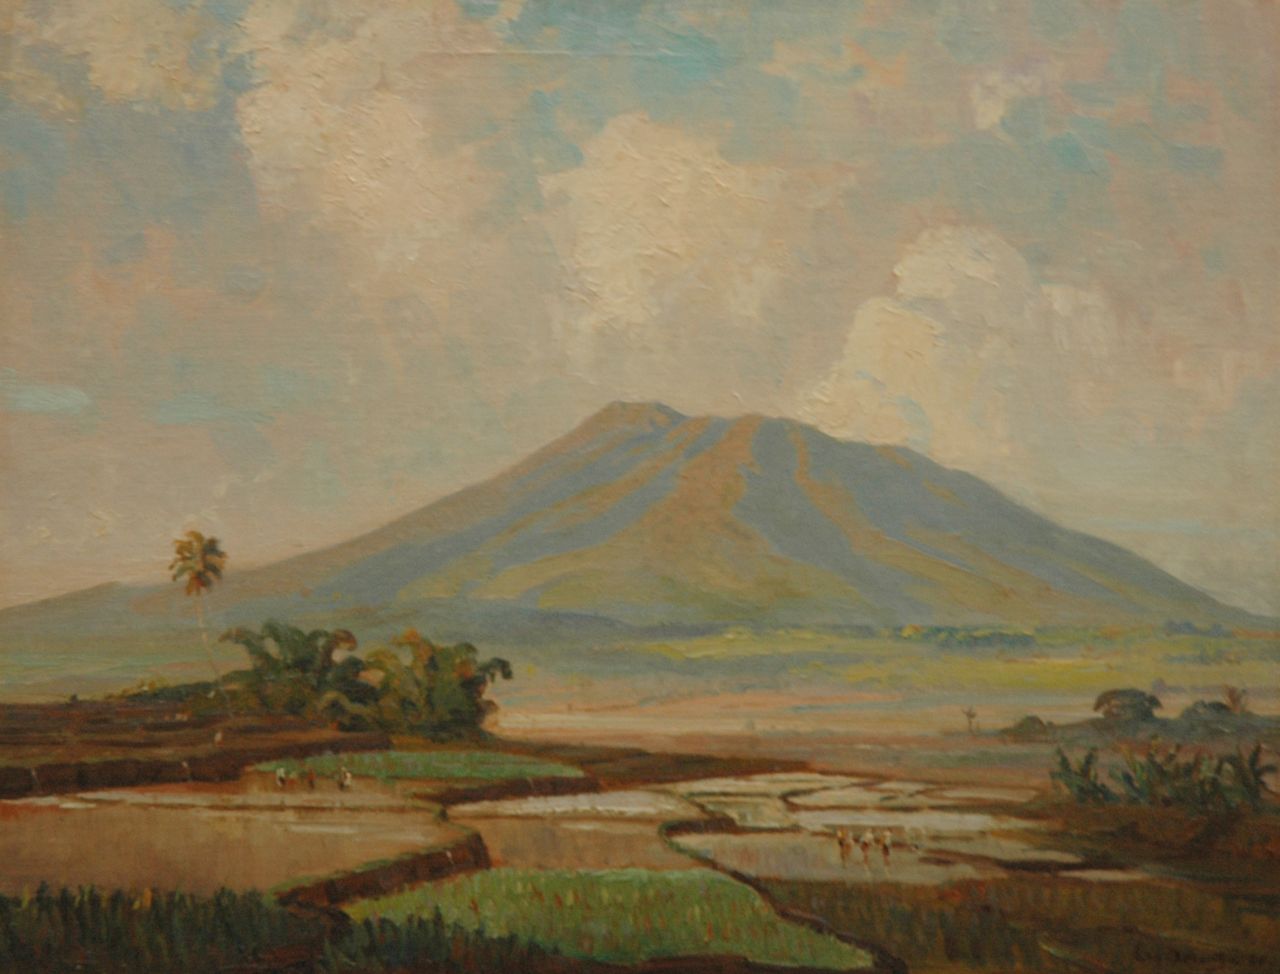 Dezentjé E.  | Ernest Dezentjé, Pickers in the ricefields near a vulcano, oil on canvas laid down on board 46.9 x 60.5 cm, signed l.r. and dated '28